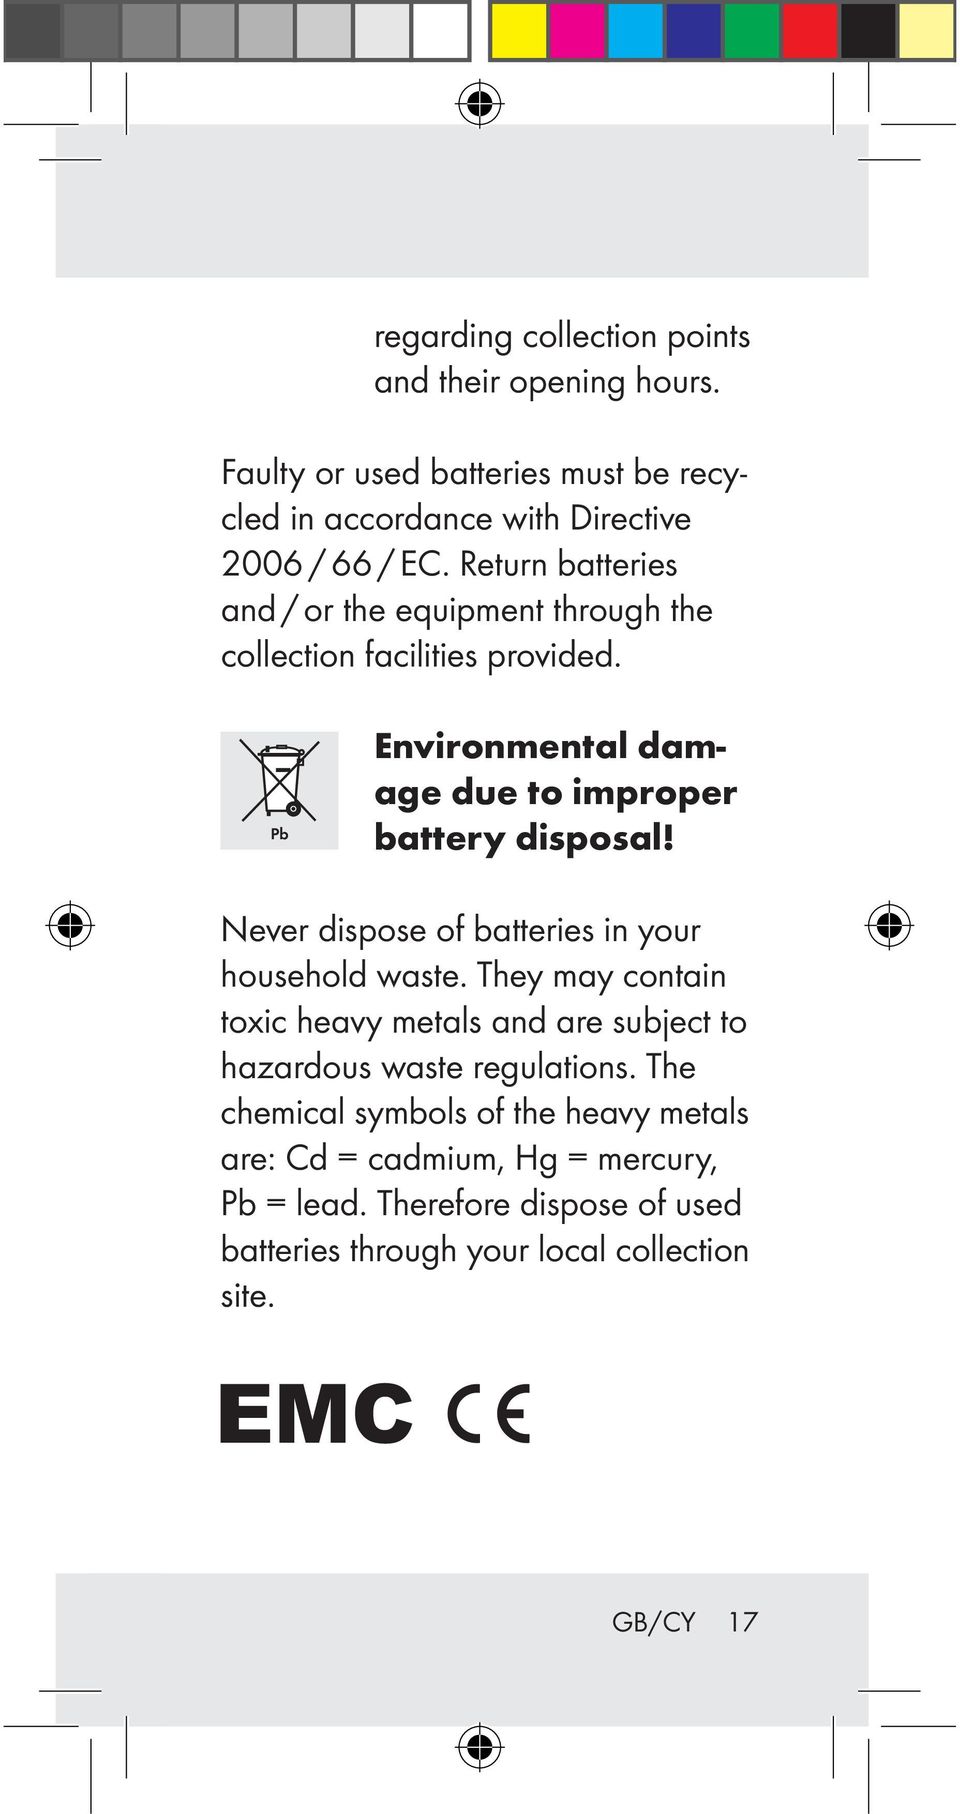 Never dispose of batteries in your household waste. They may contain toxic heavy metals and are subject to hazardous waste regulations.